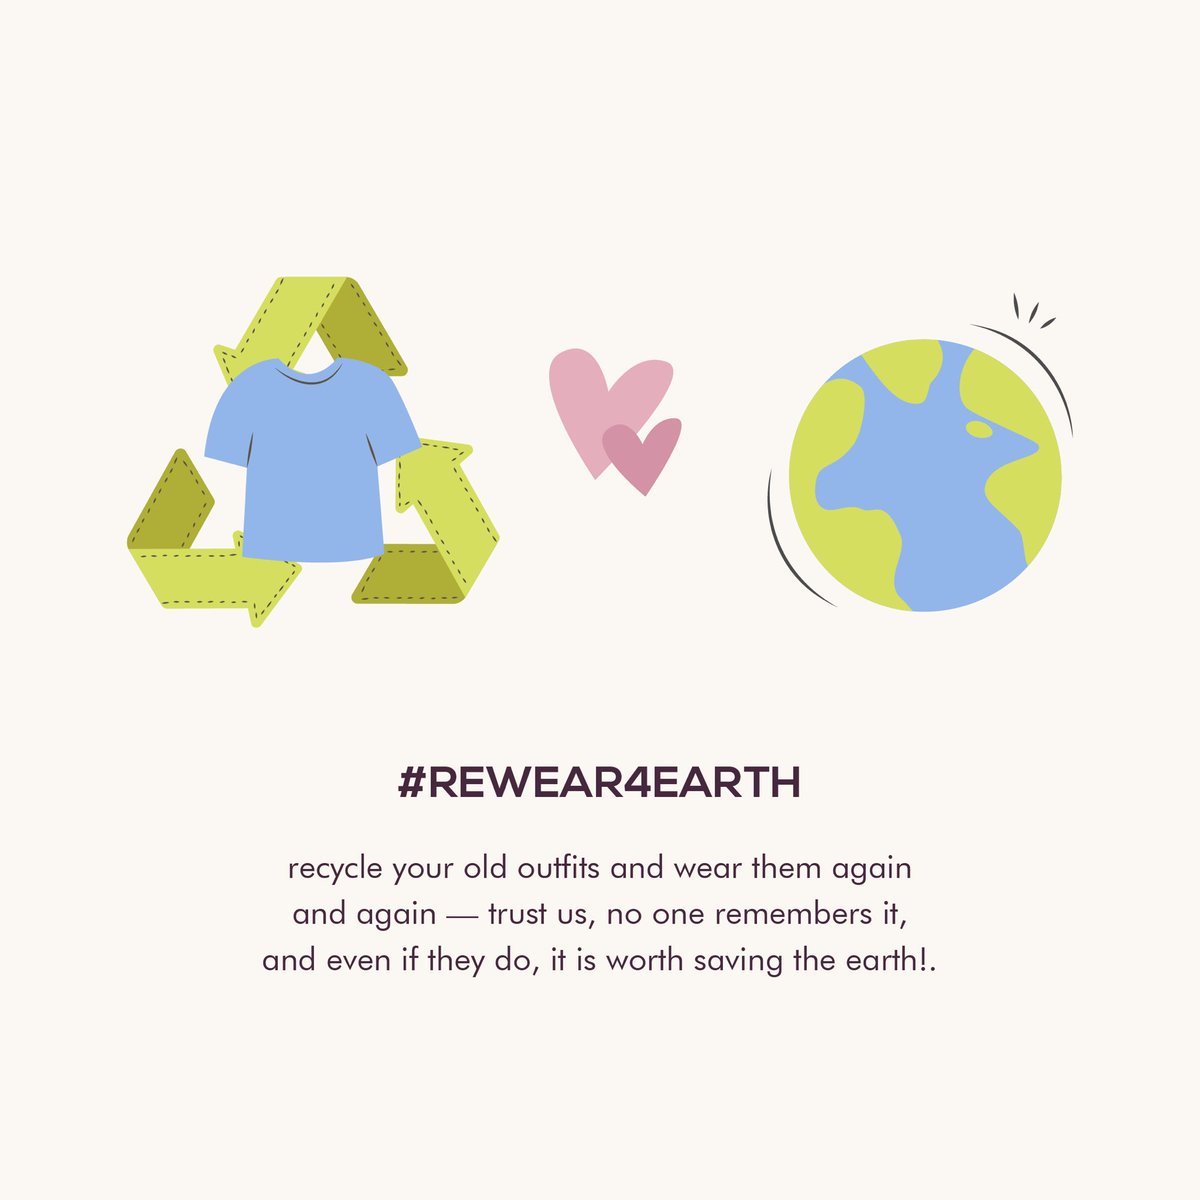 Be conscious about your consumption and aware of how it affects your home 🌏 // #ReWear4Earth 🌏
.
.
.
.
#nofastfashion #responsiblefashion #sustainableliving #sustainablelife